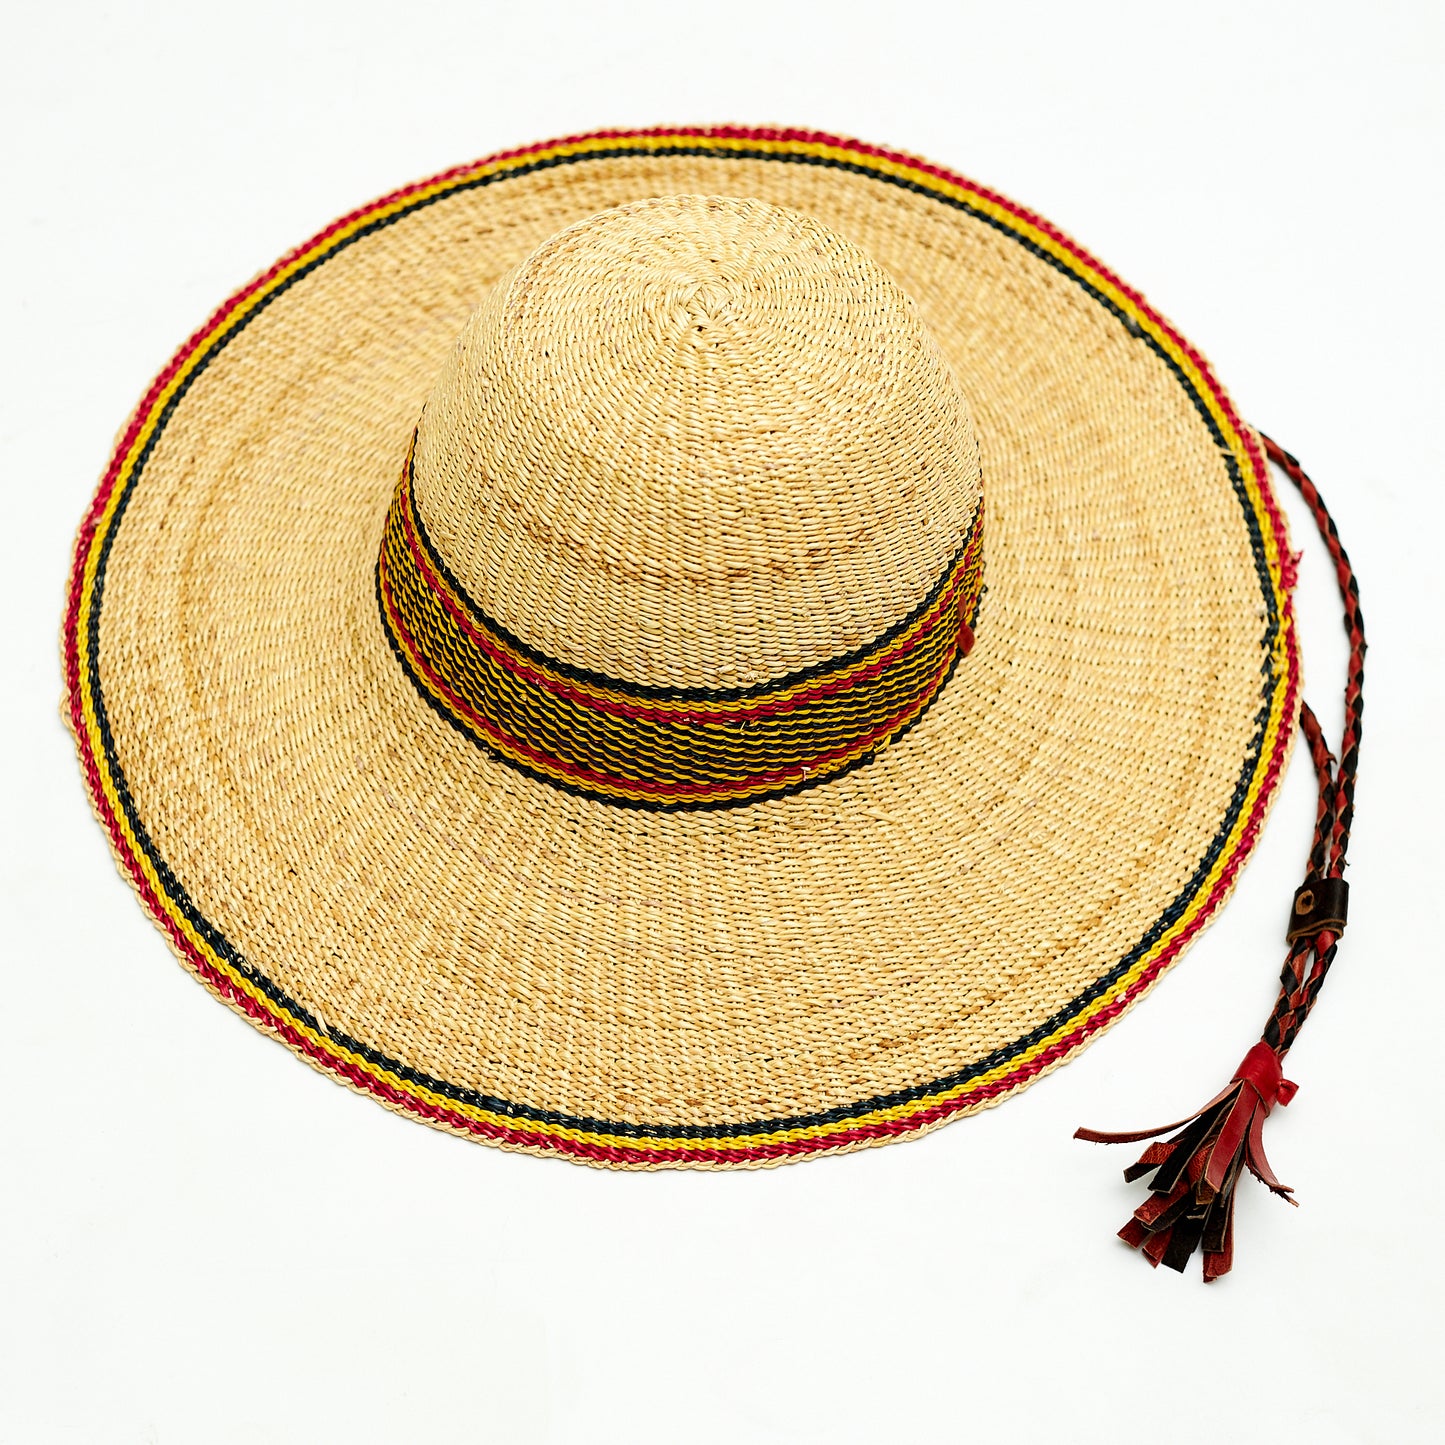 Natural Elephant Grass Handwoven Garden Hat Designed with Black, yellow and red colors,Made in the Northern part of Ghana-Bolgatanga.